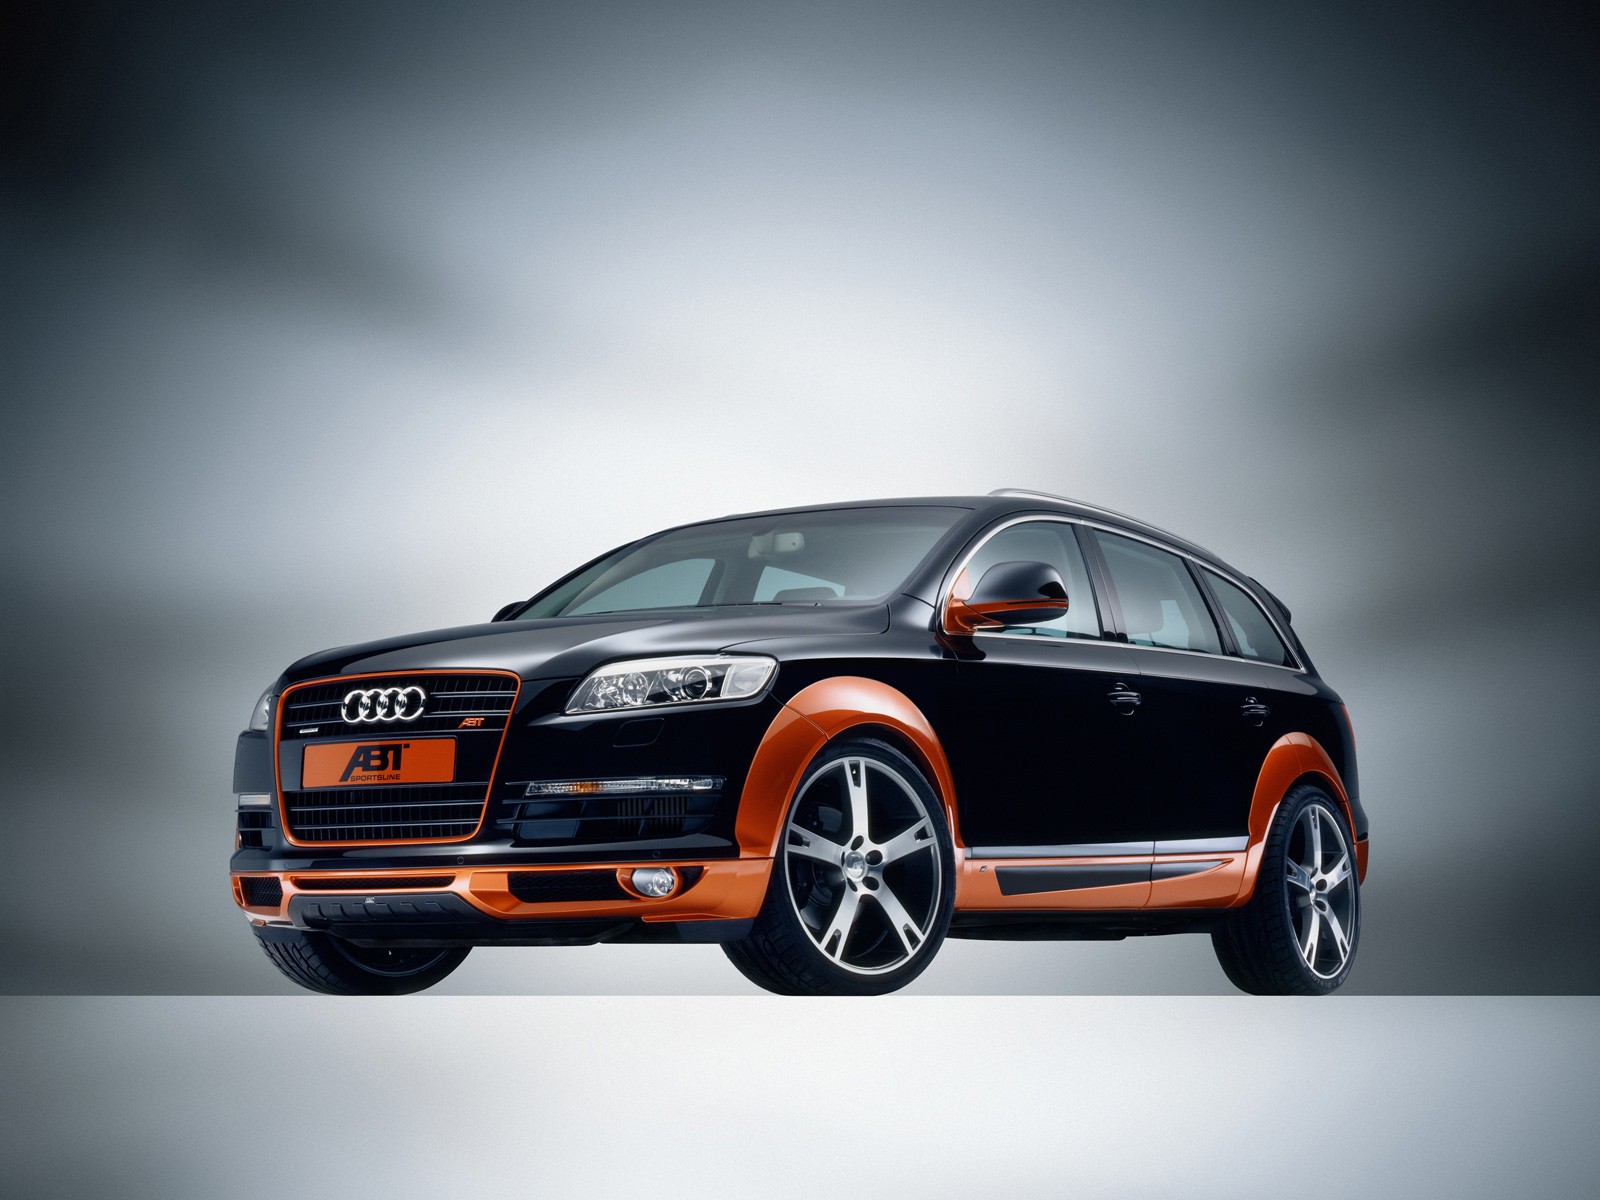 Galery Of Picture: Audi Q7 Tuning Car HD Wallpapers